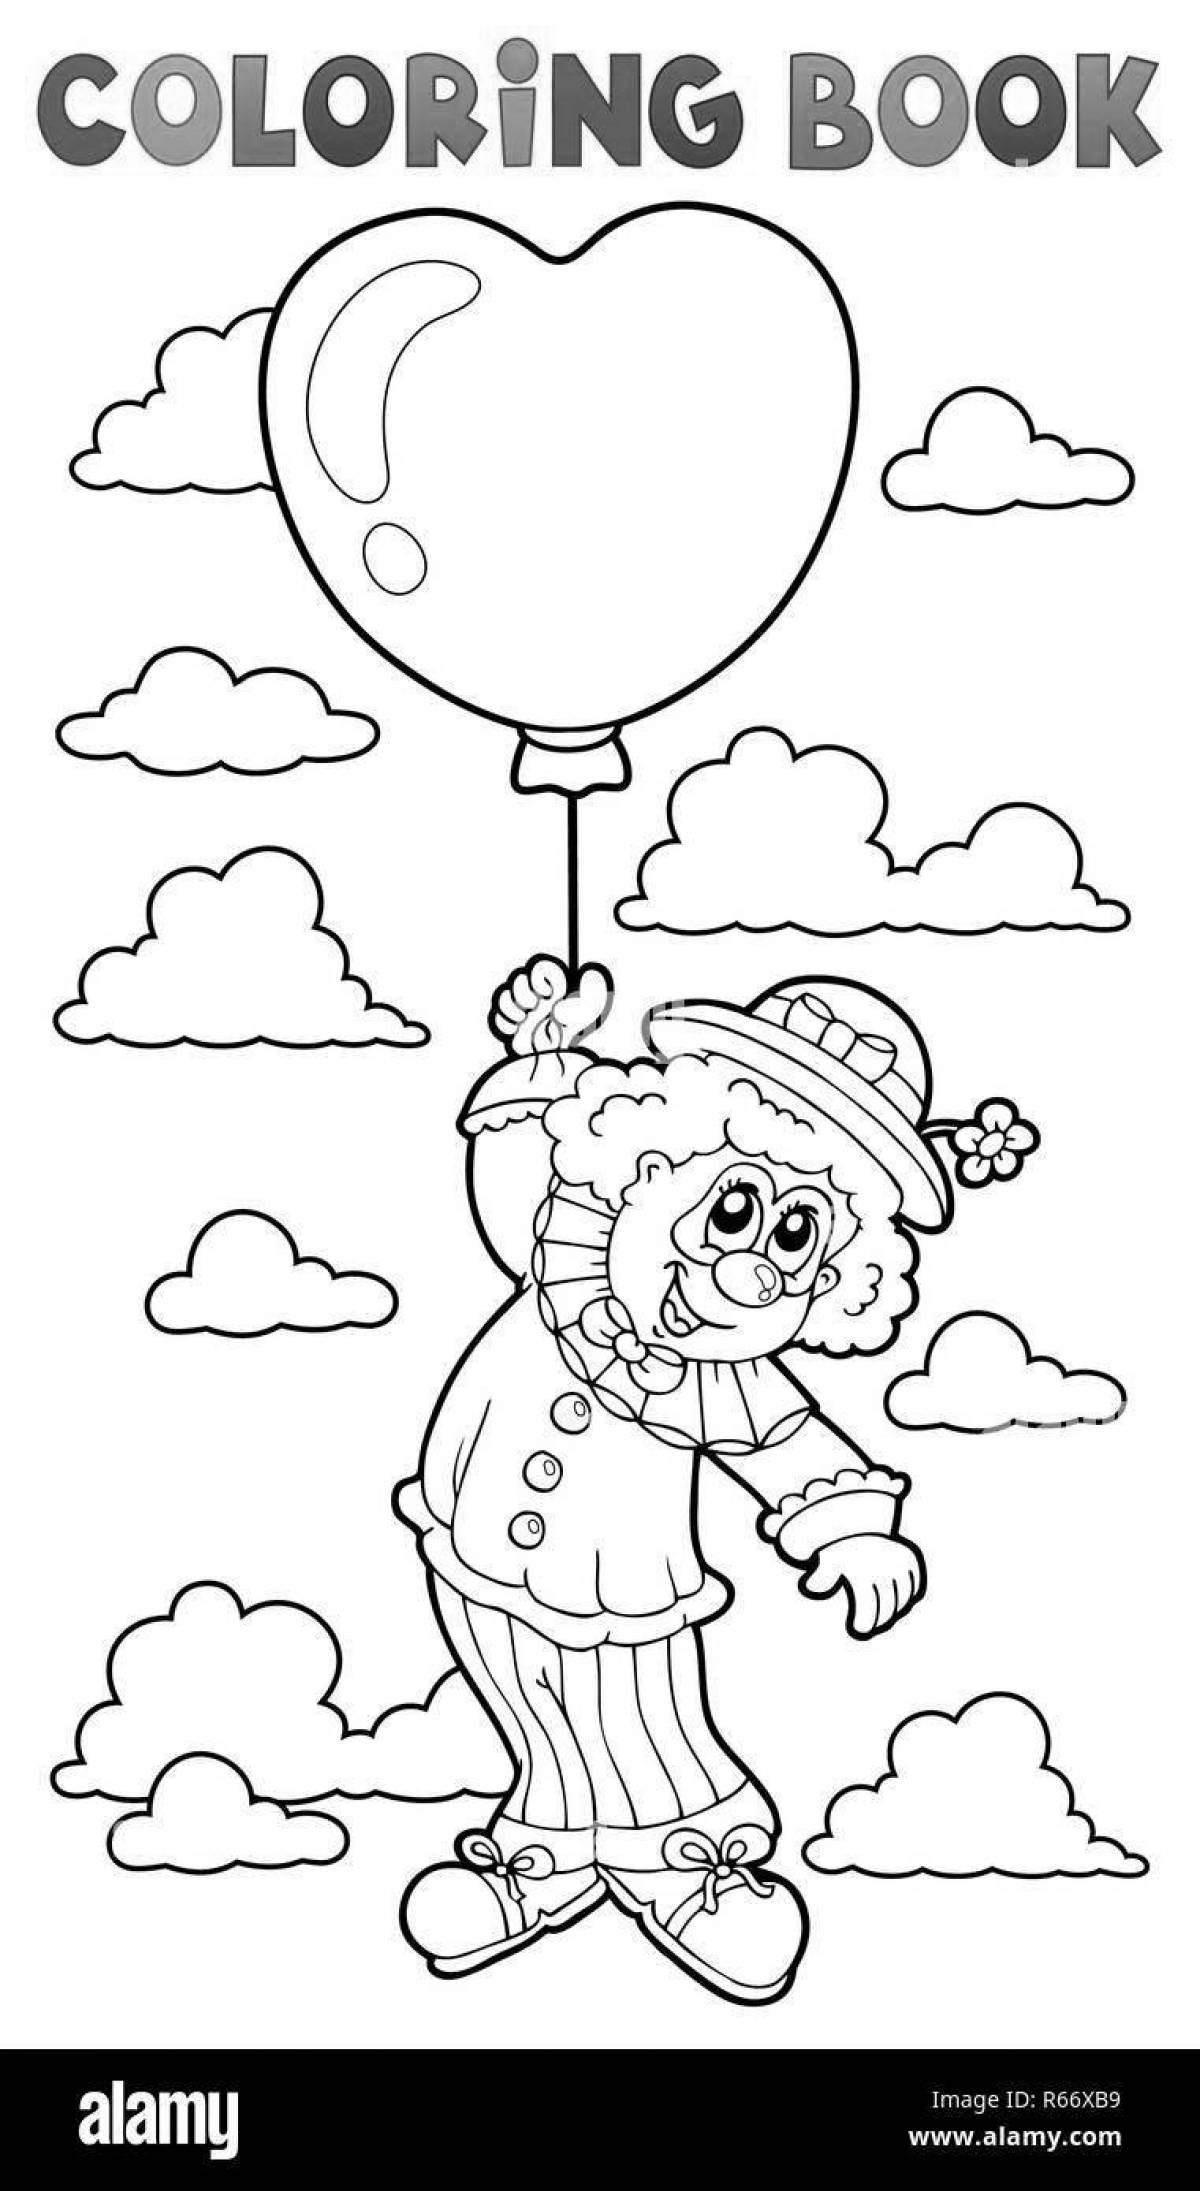 Colorful clown with balloons